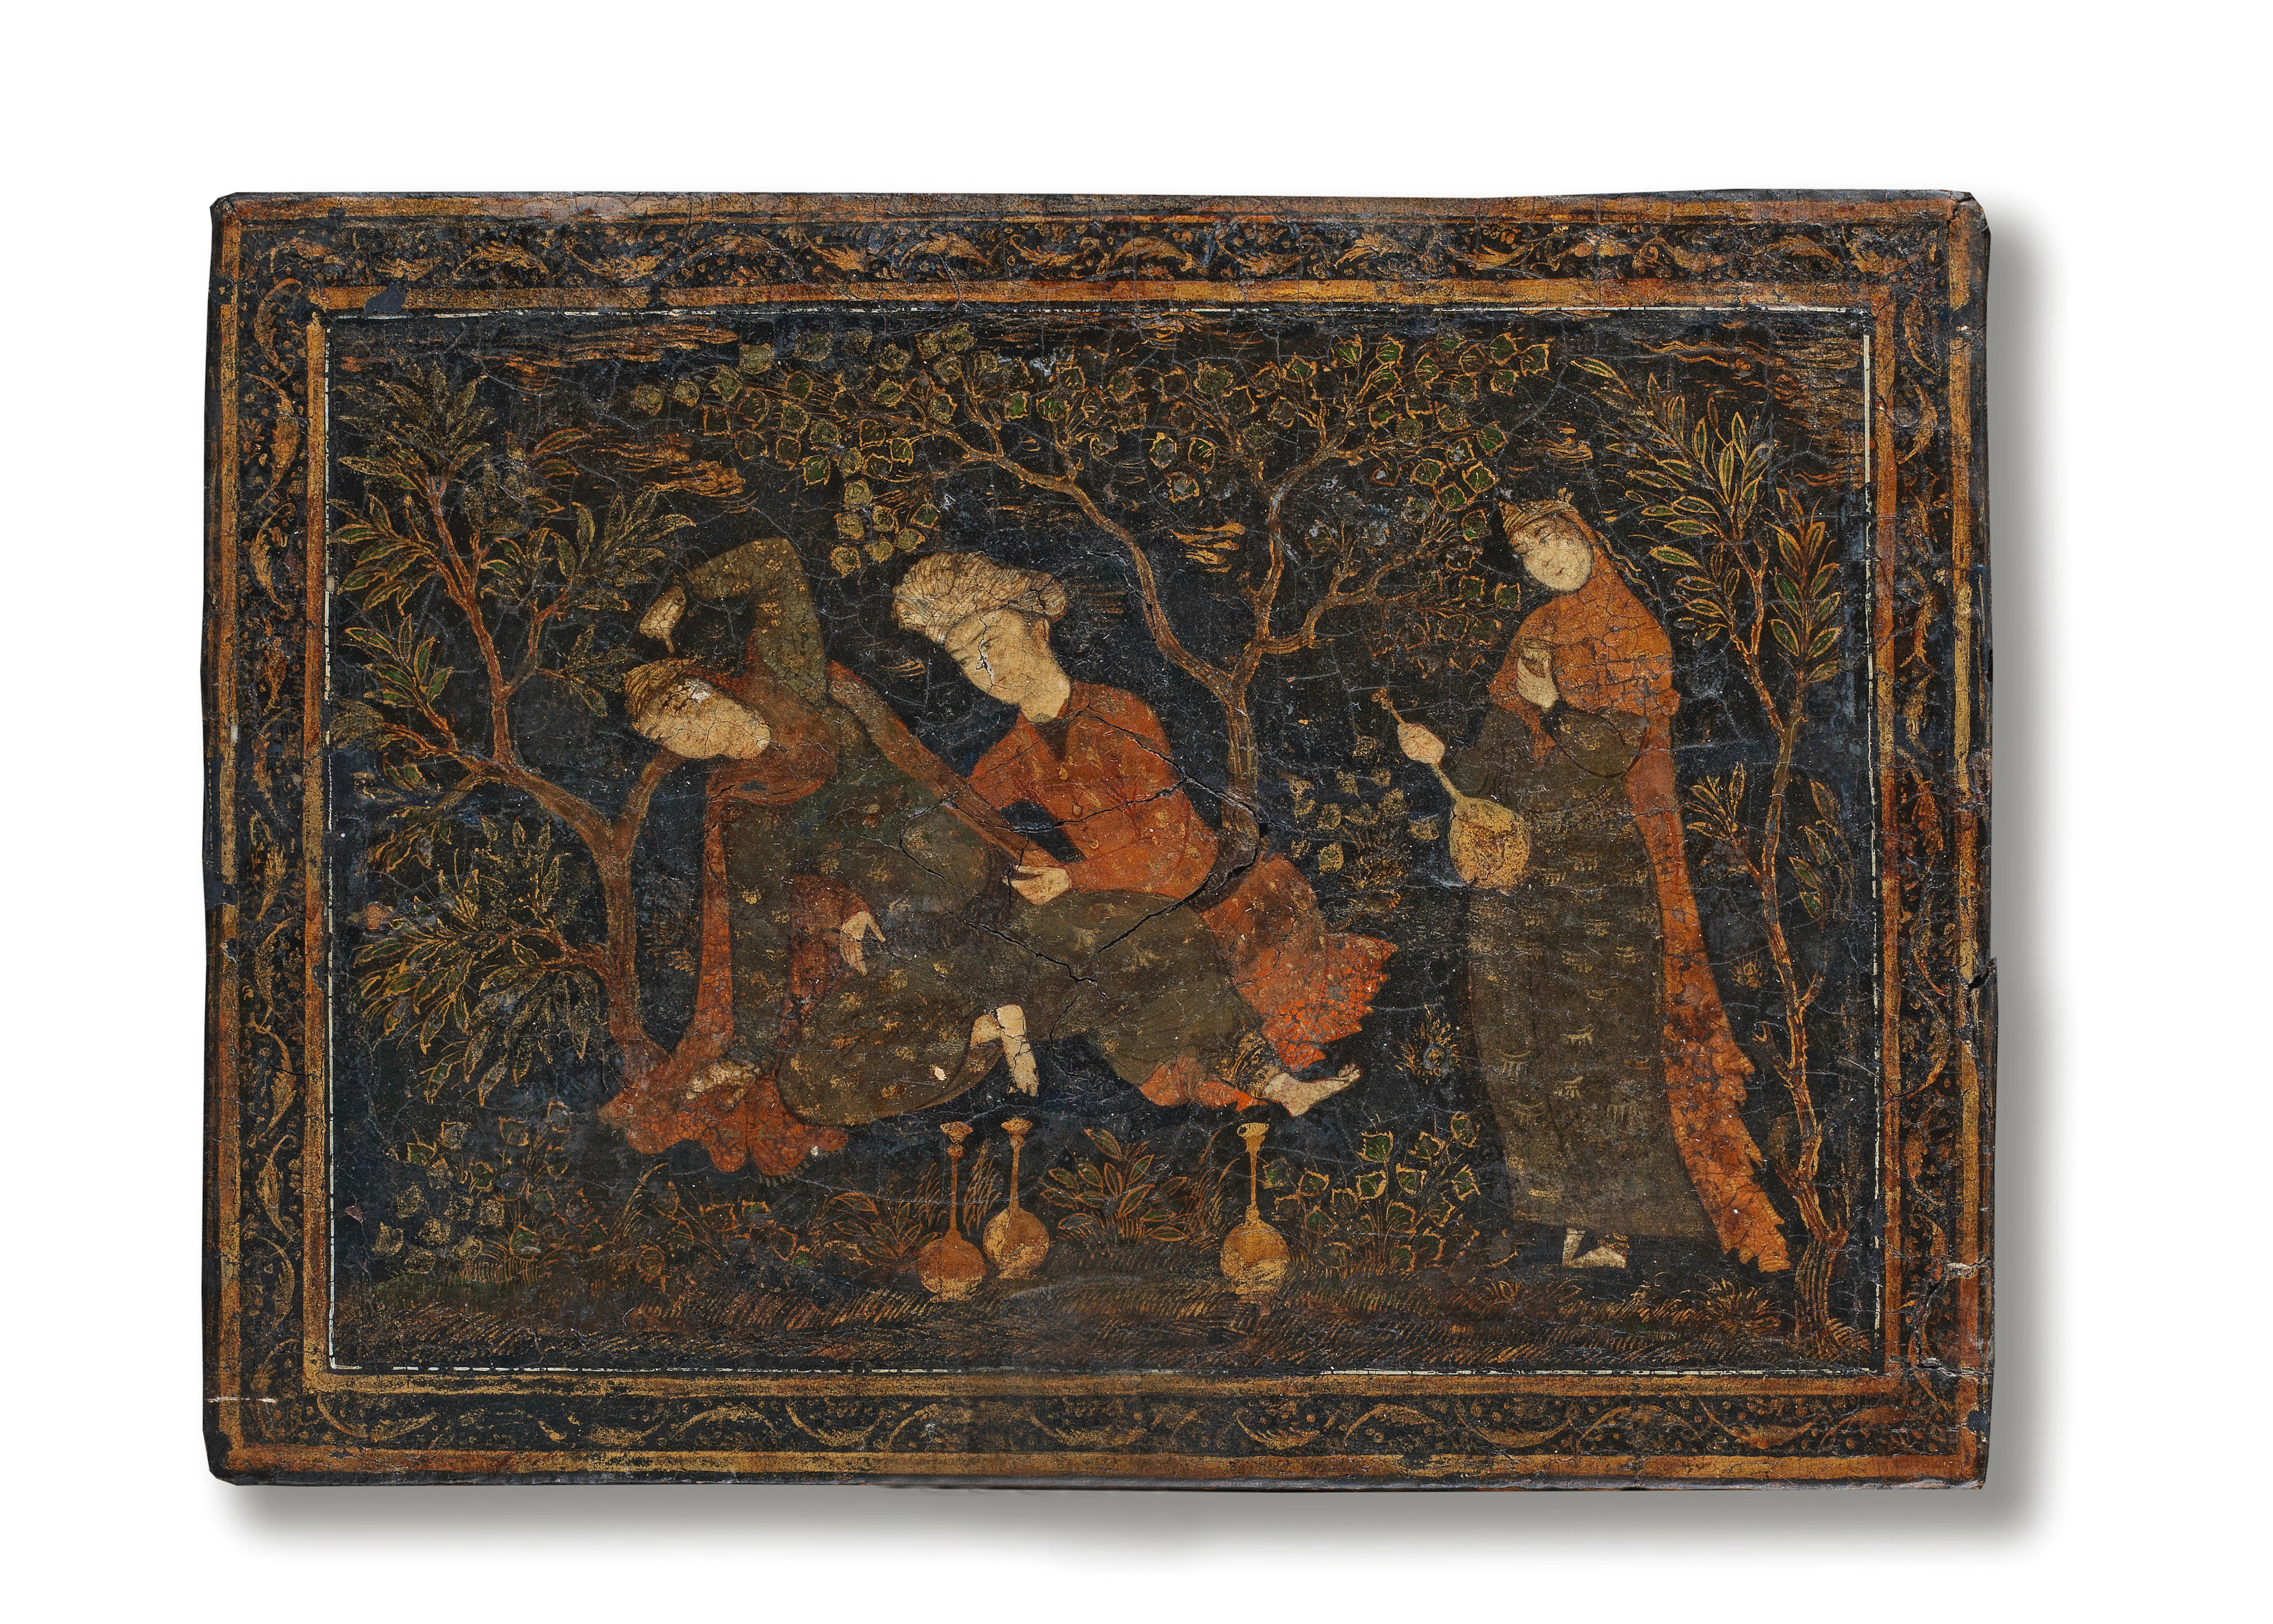 SAFAVID PAINTED LACQUER PANEL, PERSIA, PERHAPS ISFAHAN, SECOND HALF OF THE 17TH CENTURY